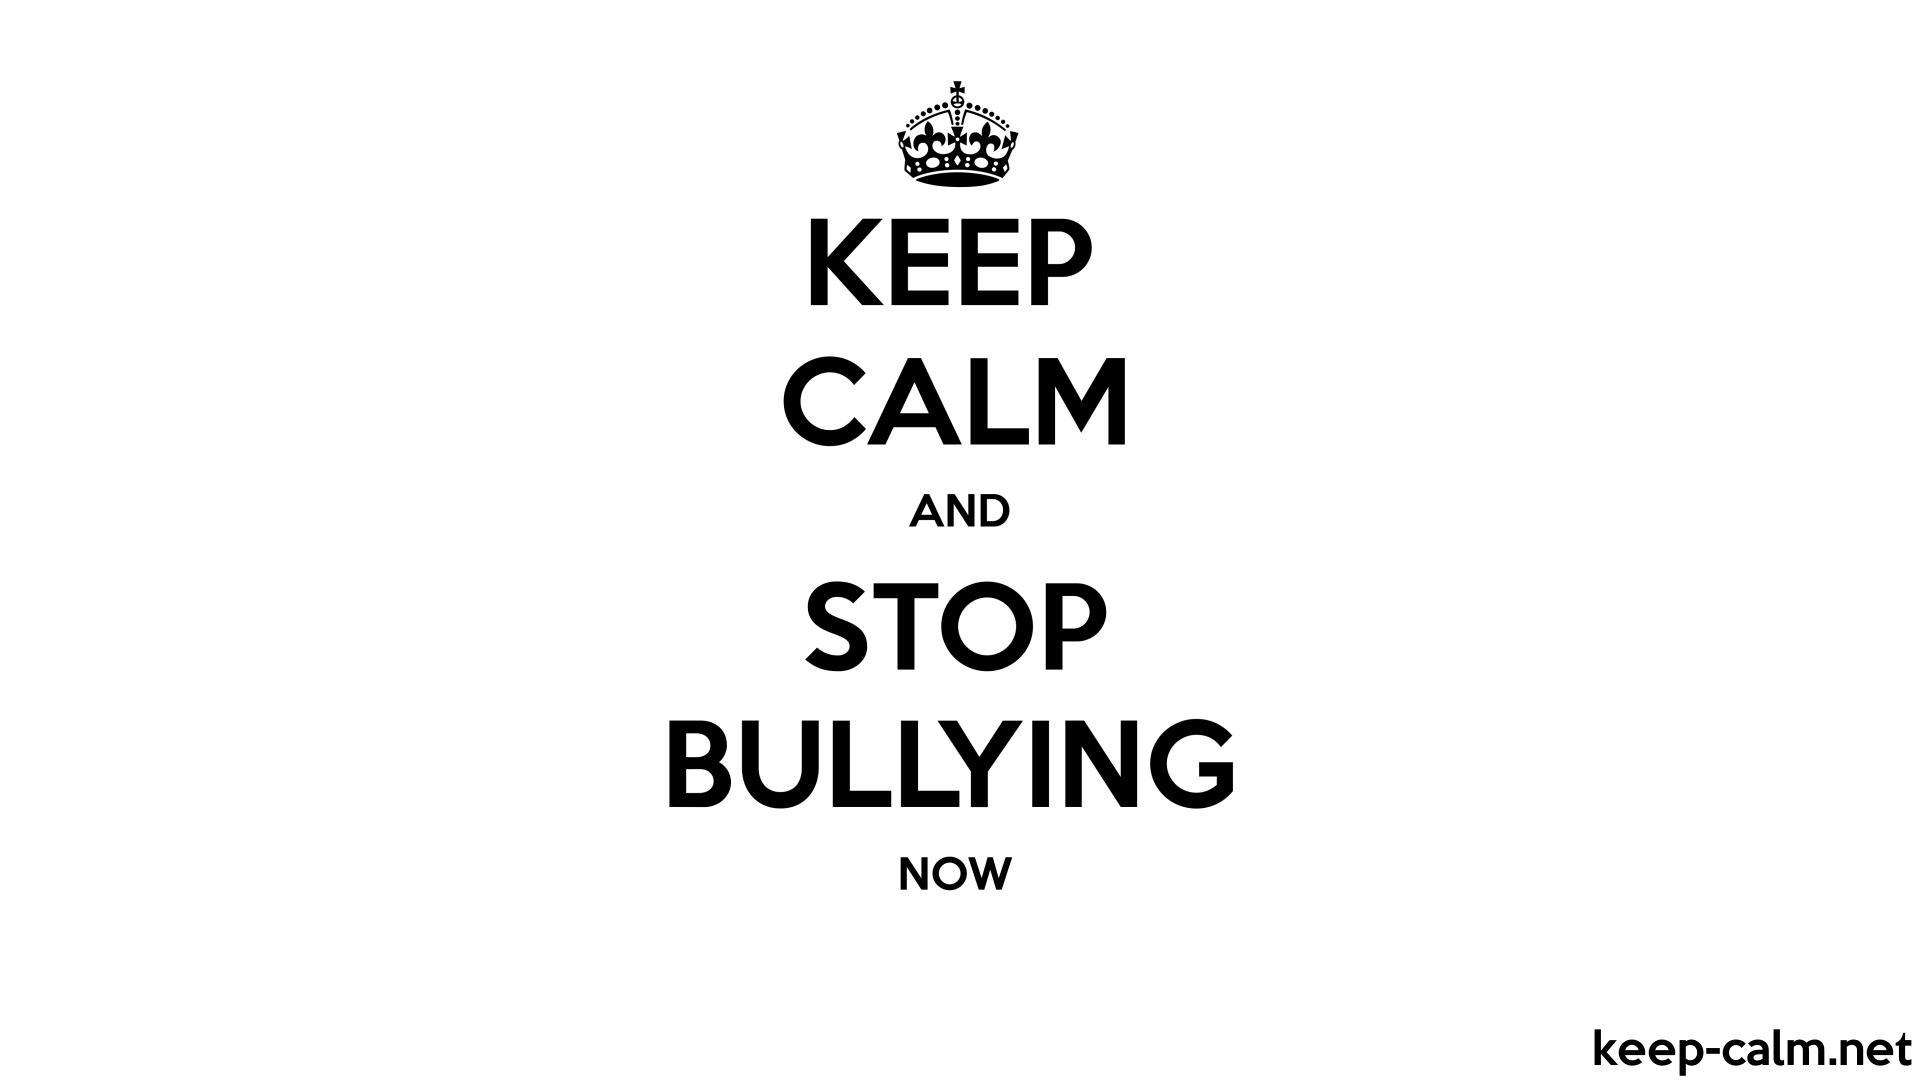 KEEP CALM AND STOP BULLYING NOW